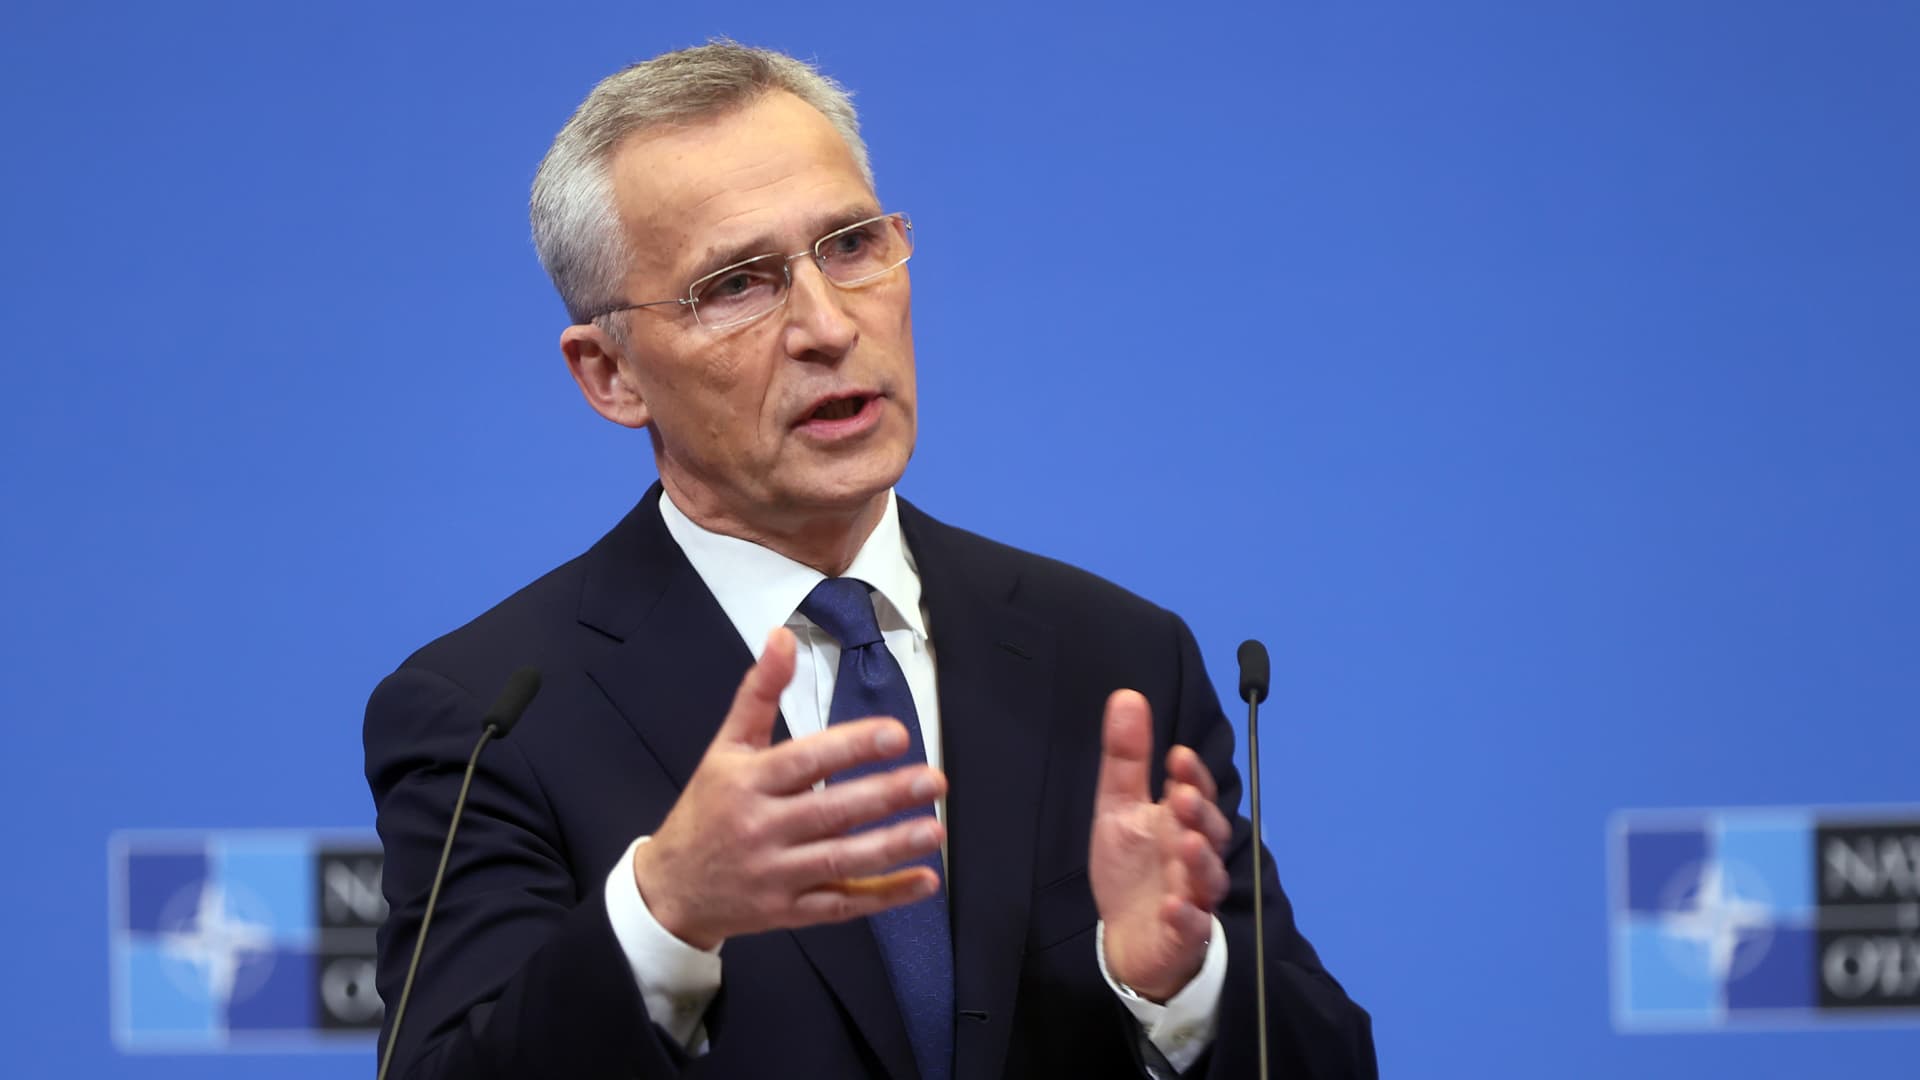 NATO Secretary General Jens Stoltenberg gives a press conference after the Extraordinary Summit of NATO Heads of State and Government in Brussels, Belgium on March 24, 2022.